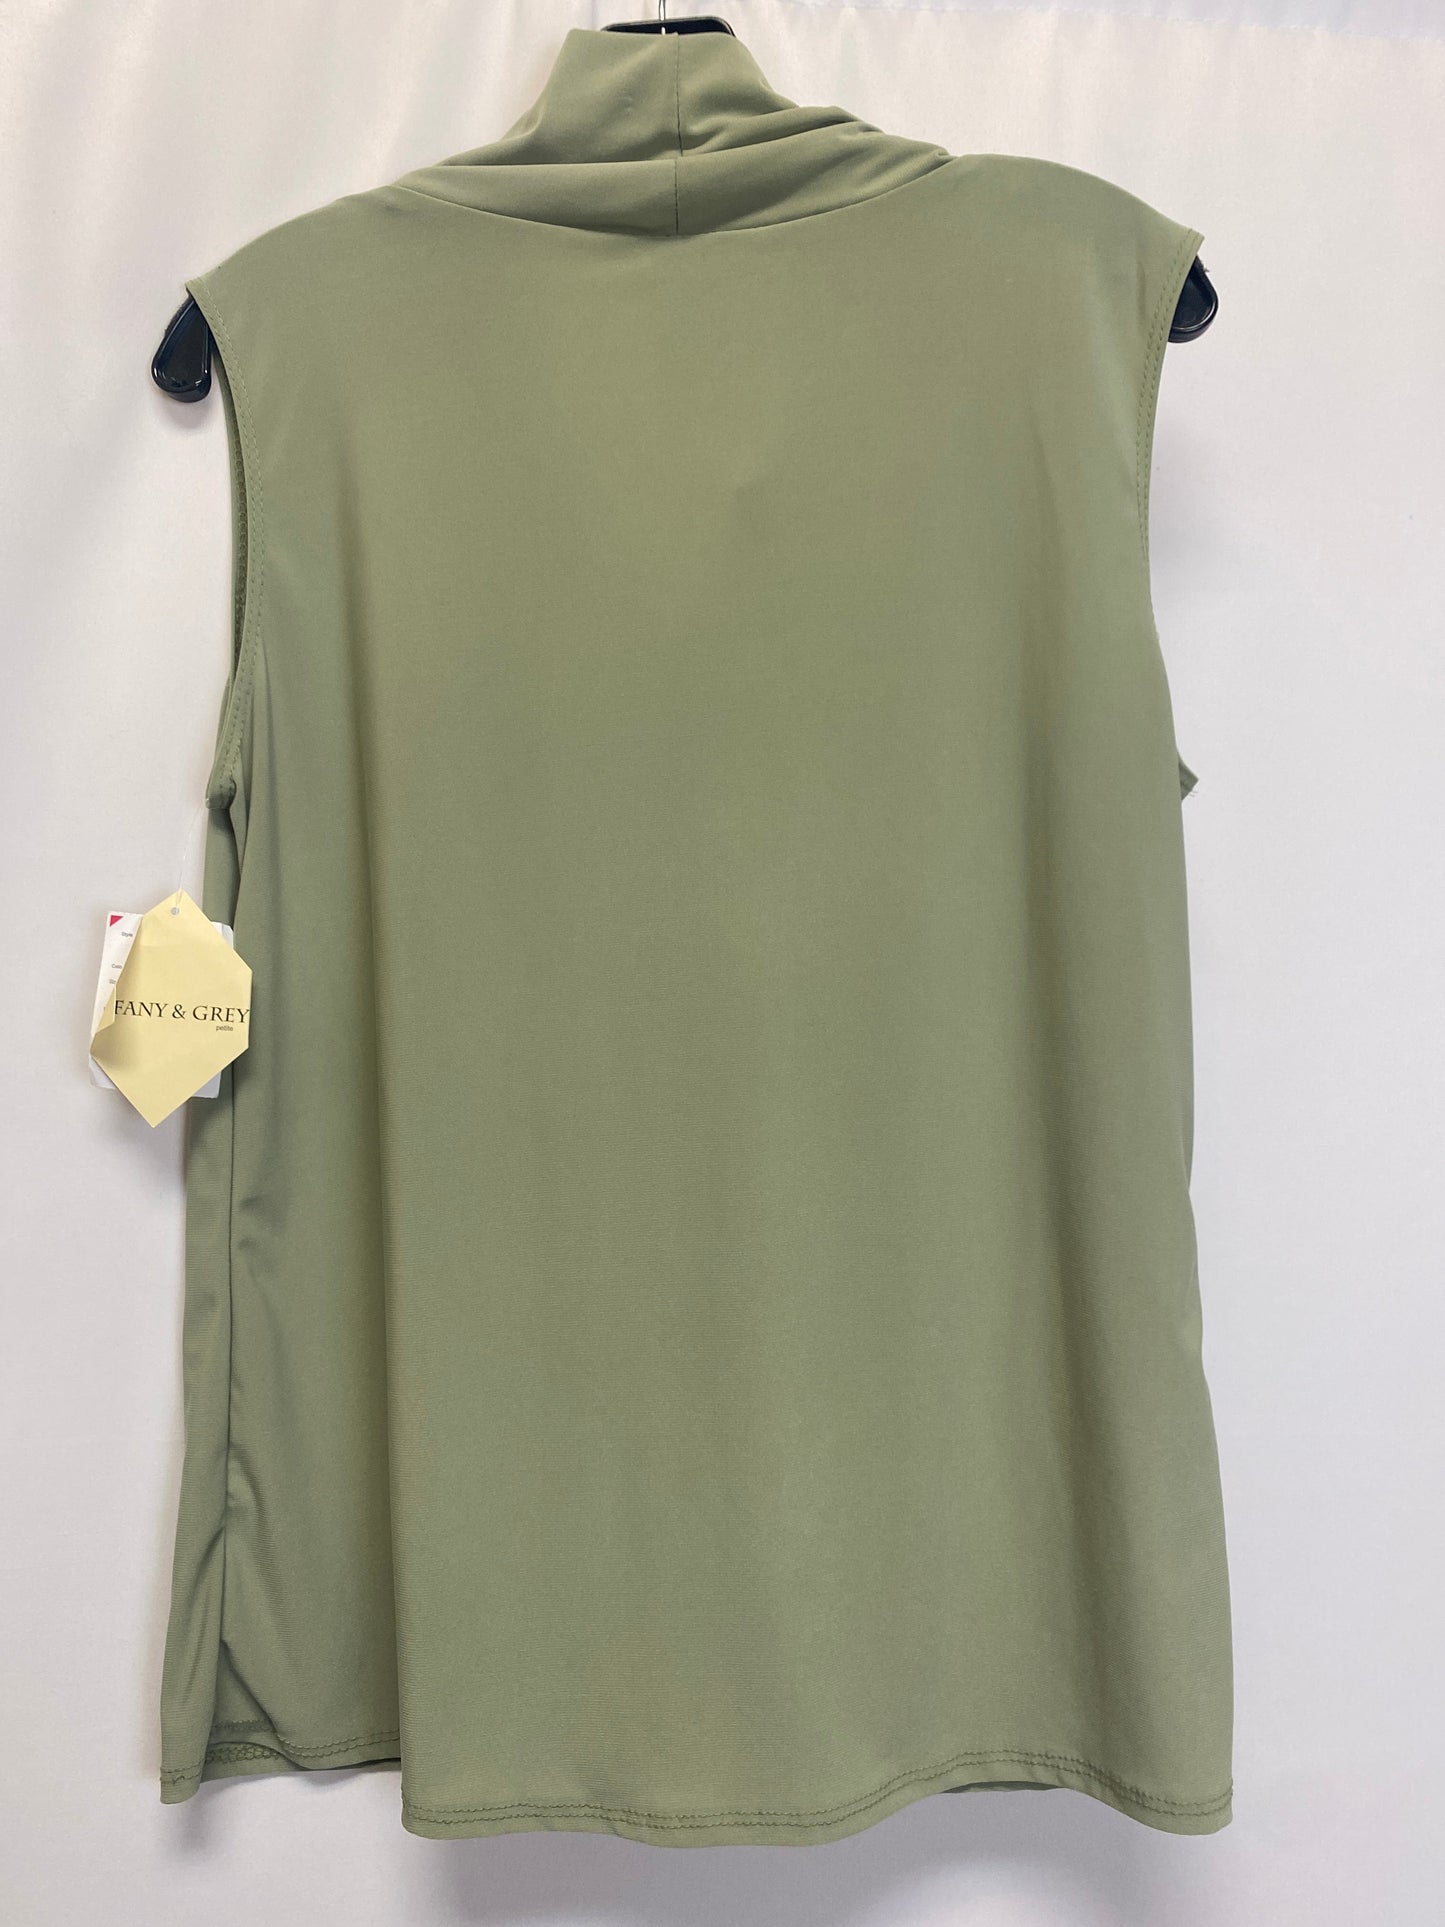 Top Sleeveless By Clothes Mentor  Size: Petite   Xl